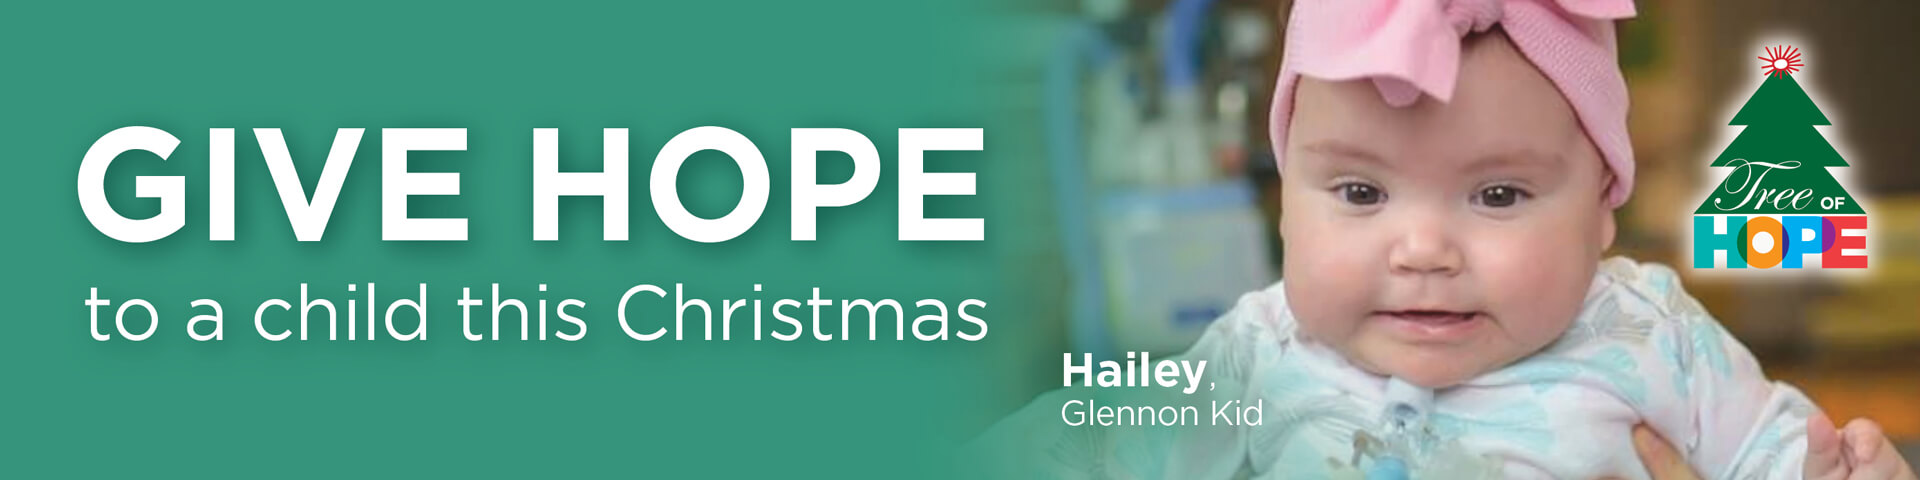 Tree of Hope web header - "Give Hope to a child this Christmas." Picture of Hailey - Glennon kid